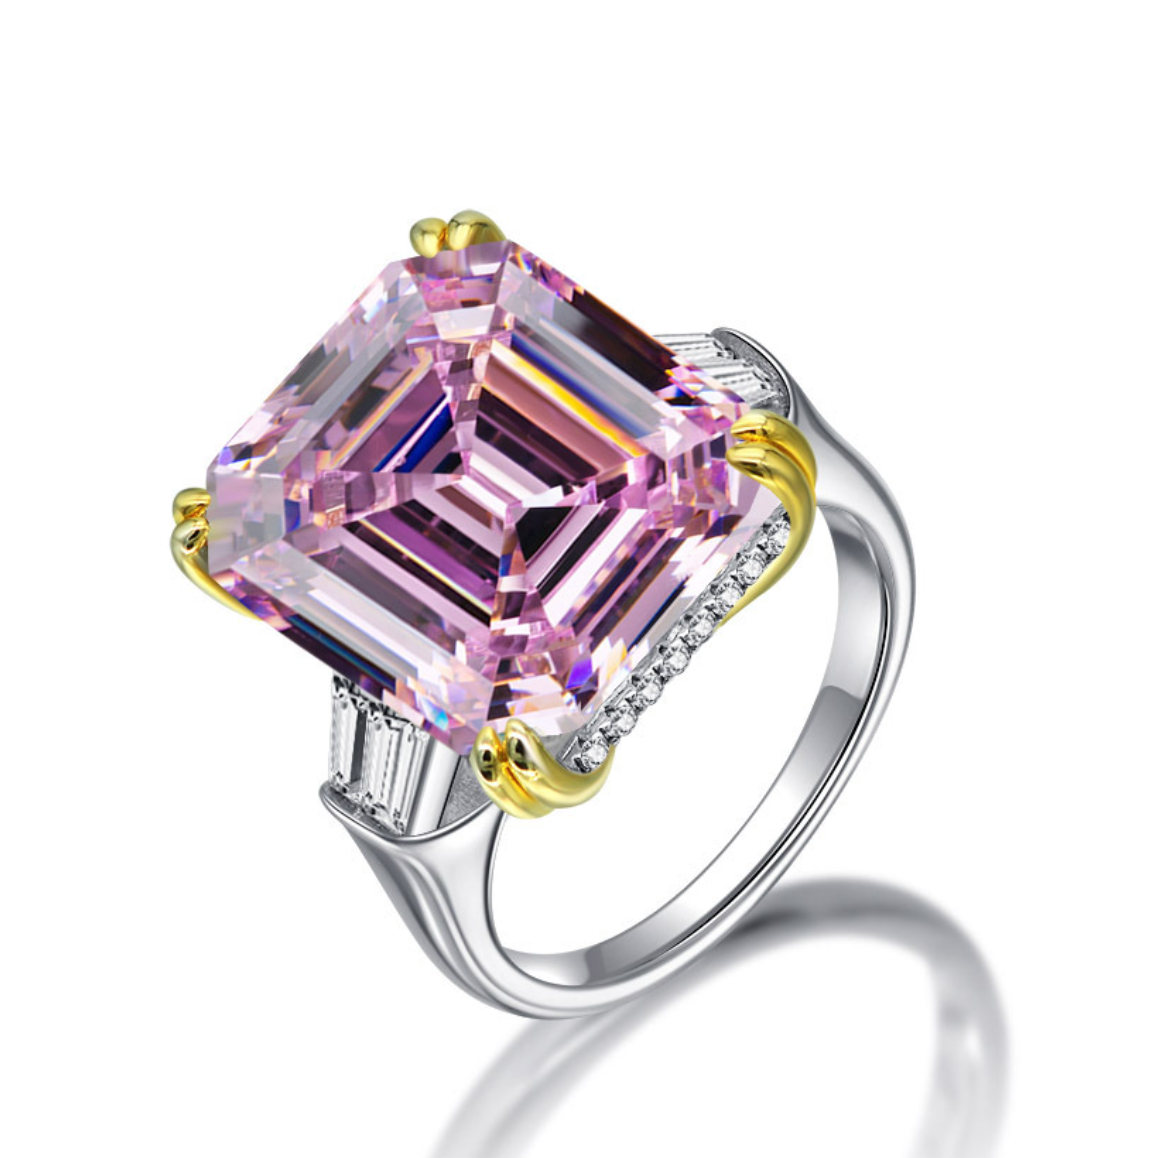 Coloured Stone & Gemstone Engagement Rings at Michael Hill NZ